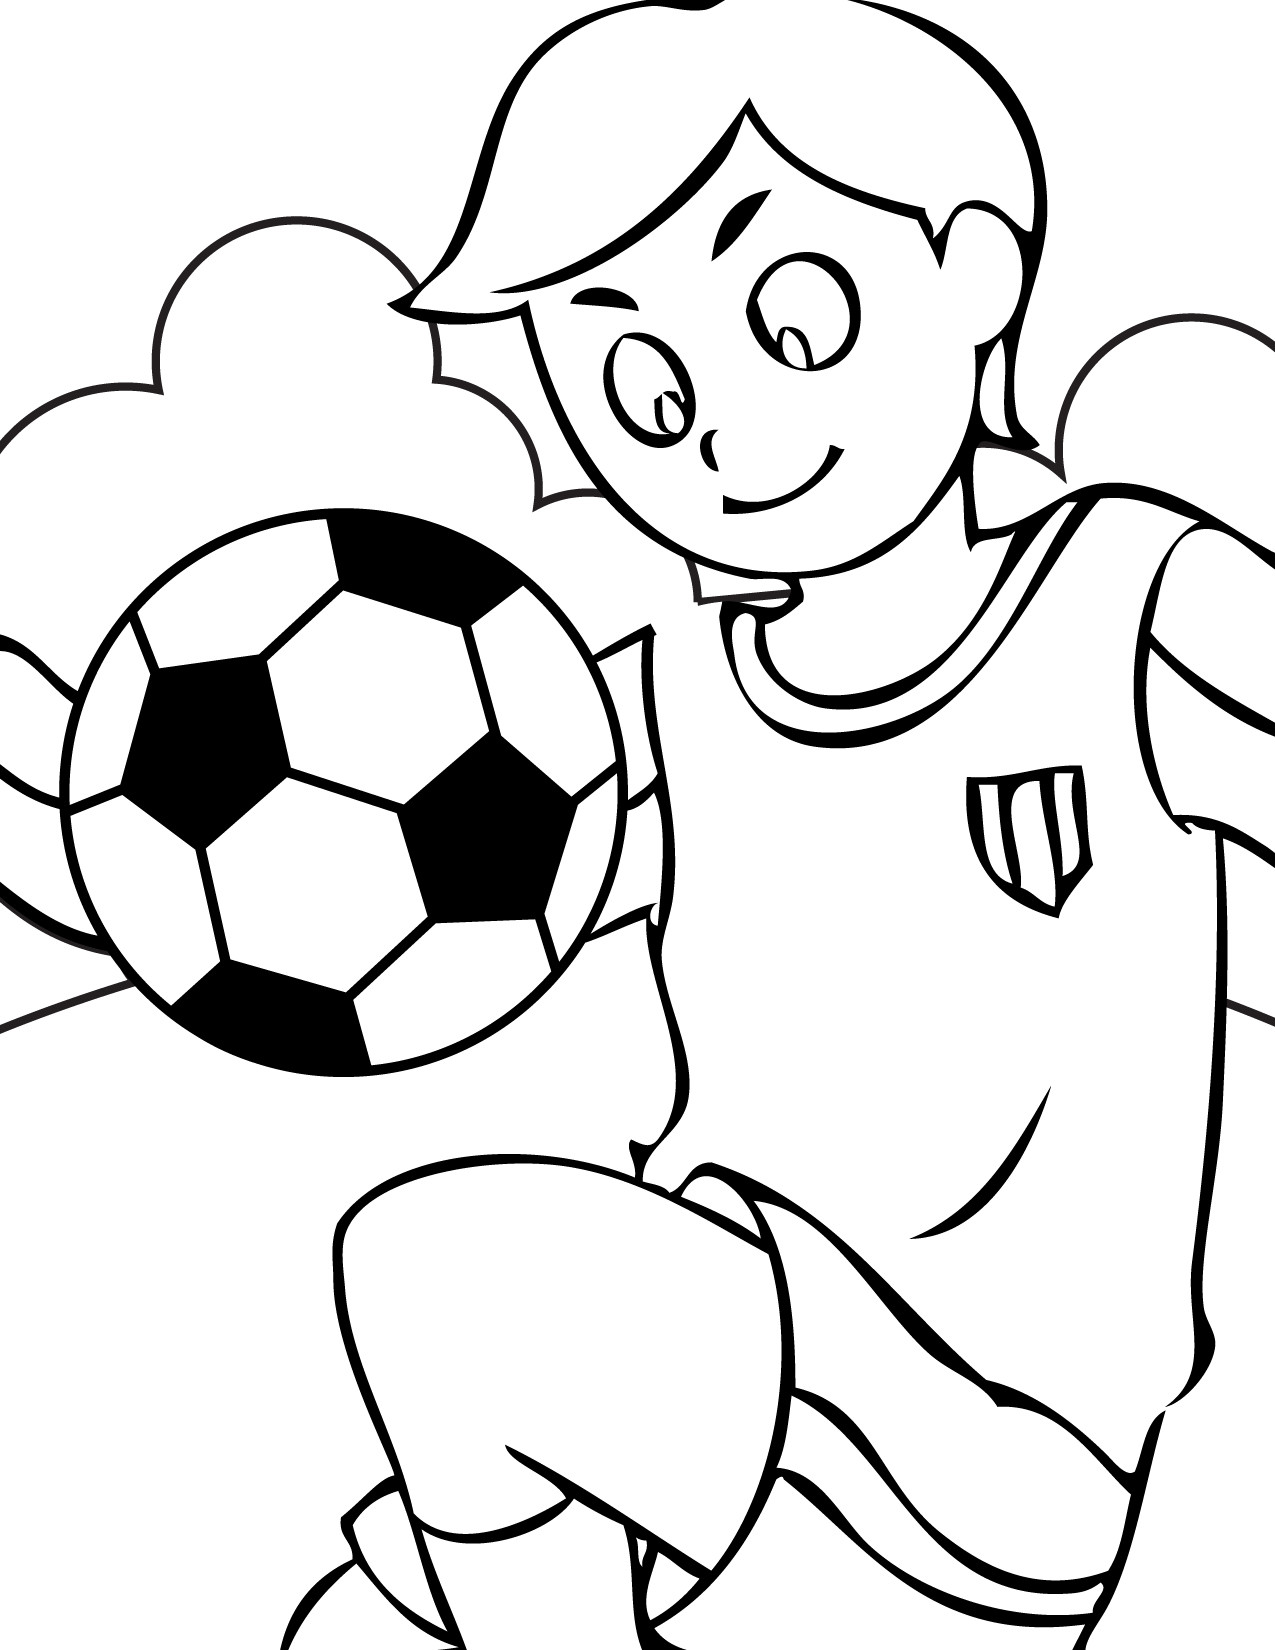 Kids Coloring Sheets For Boys
 Free Printable Sports Coloring Pages For Kids